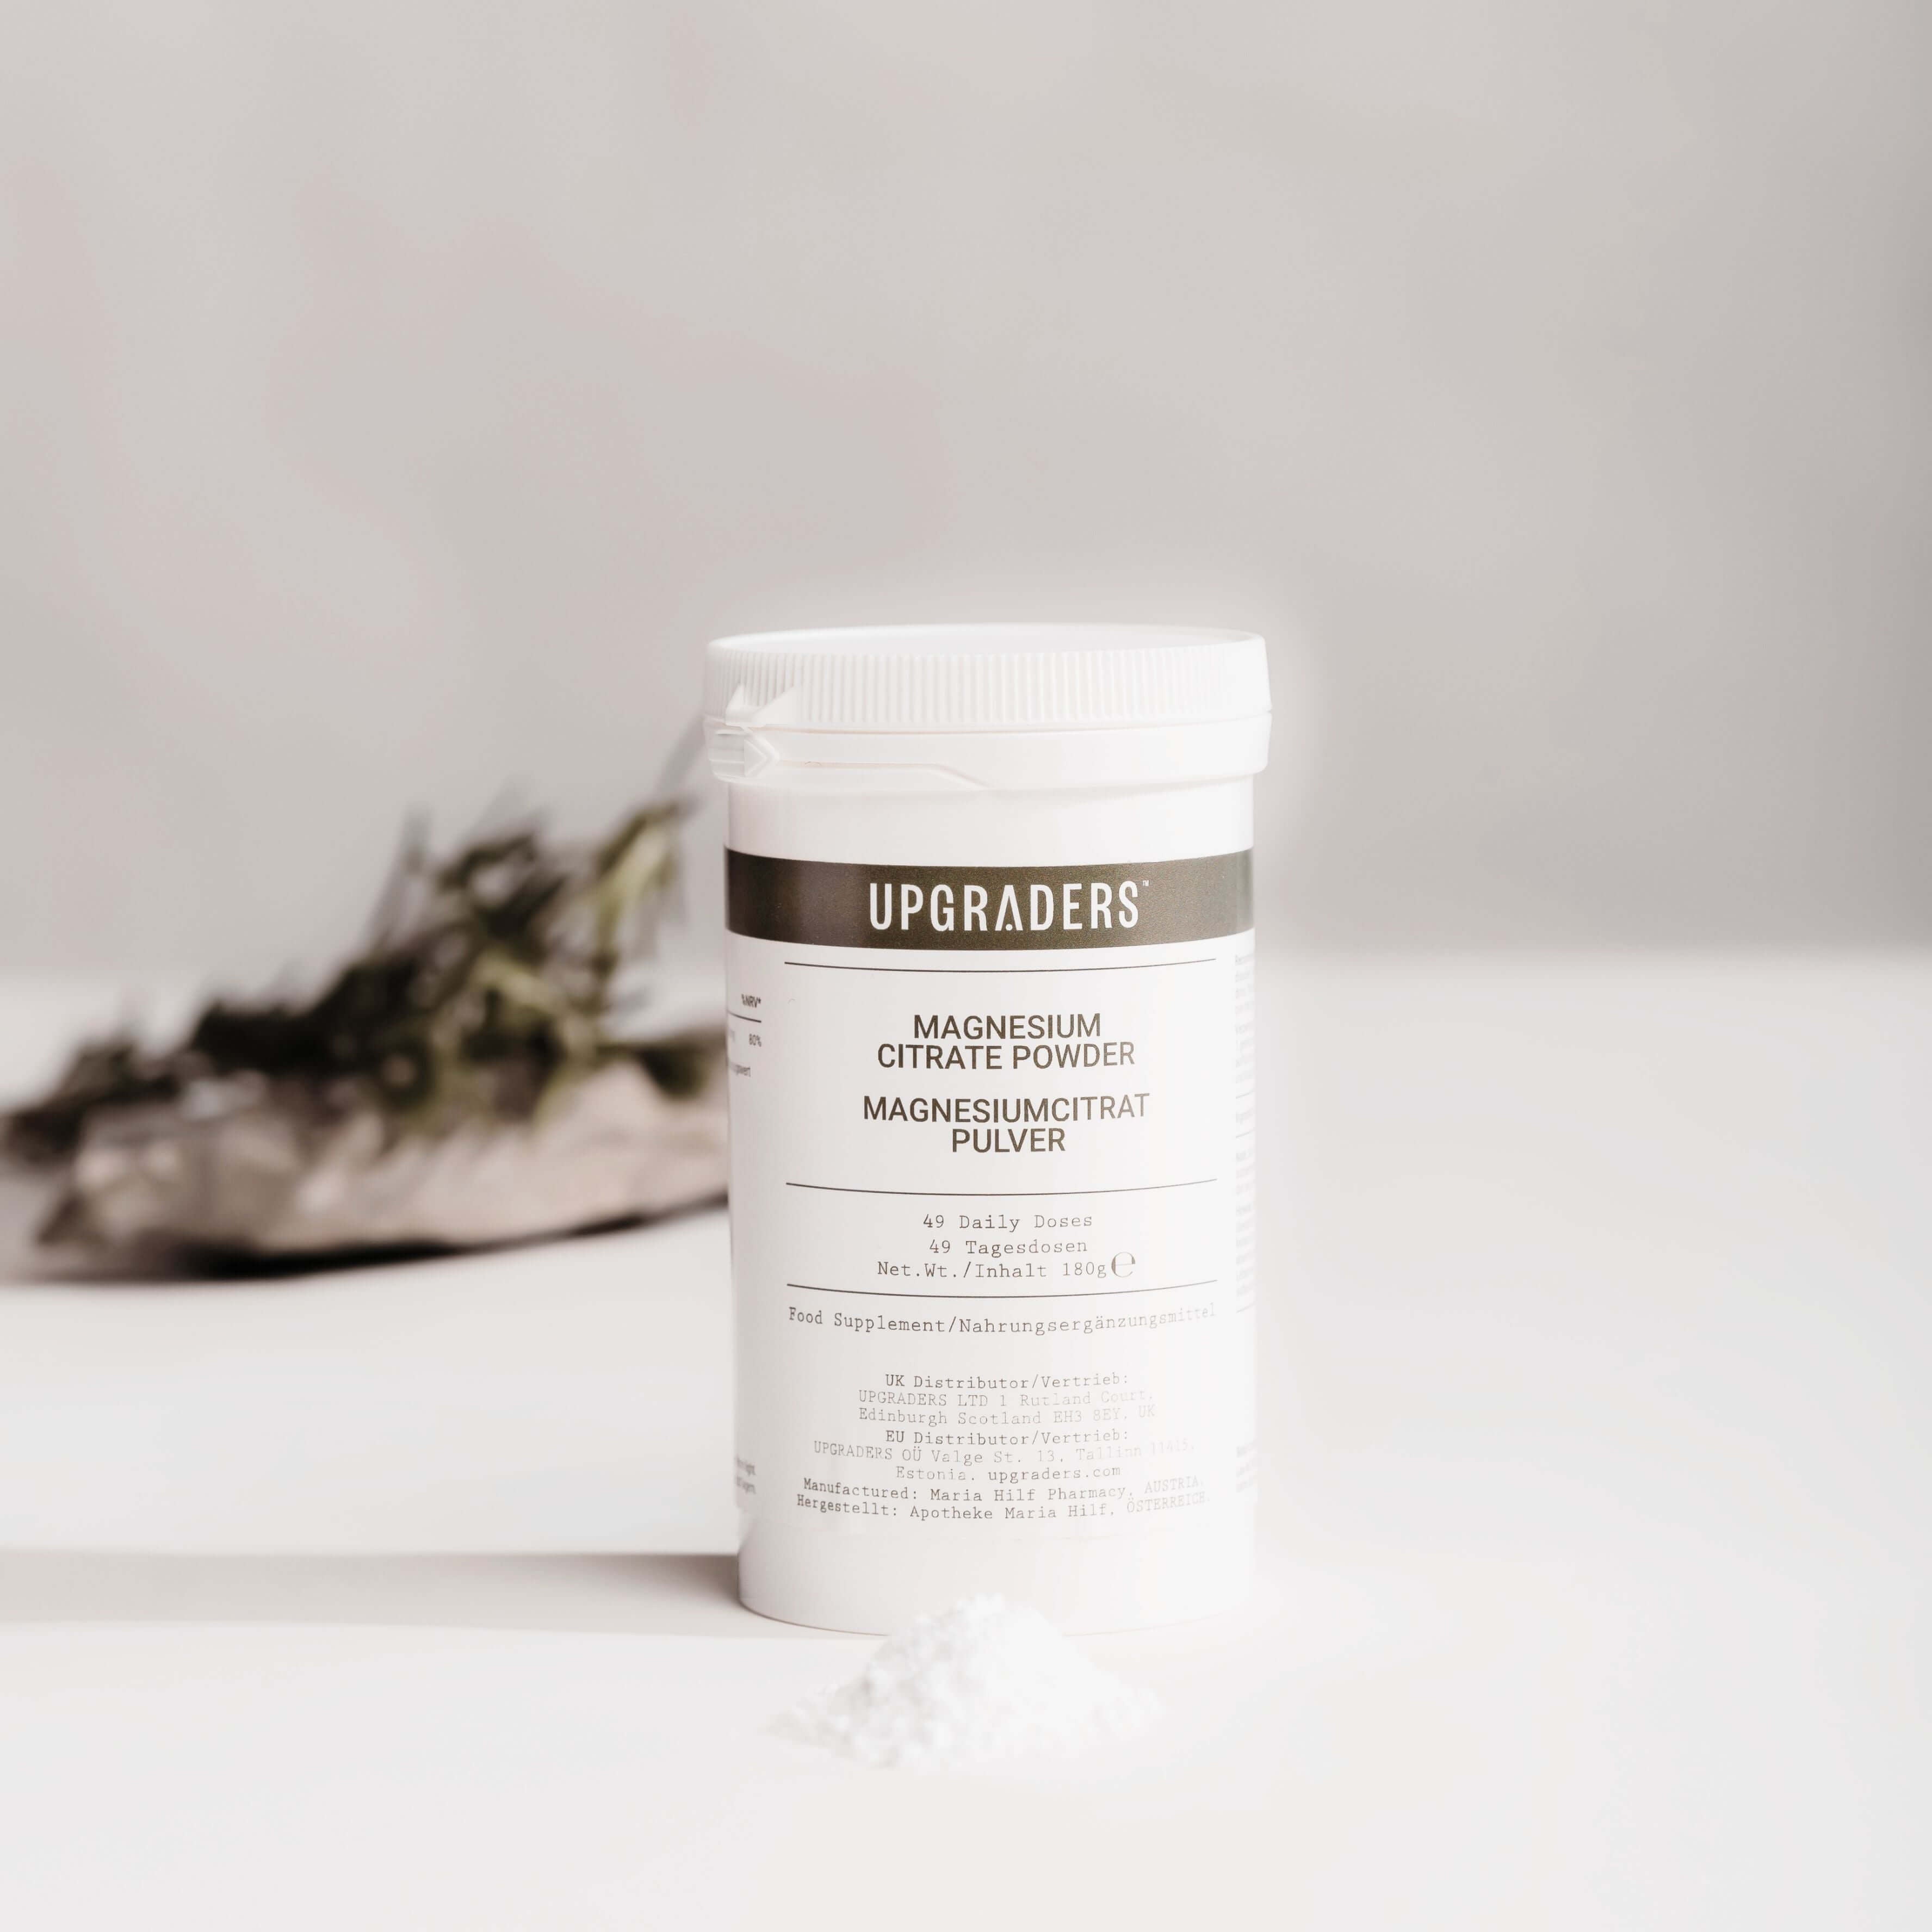 STRESS SUPPORT & CLEANSING EFFECT: Pure Magnesium Citrate Powder